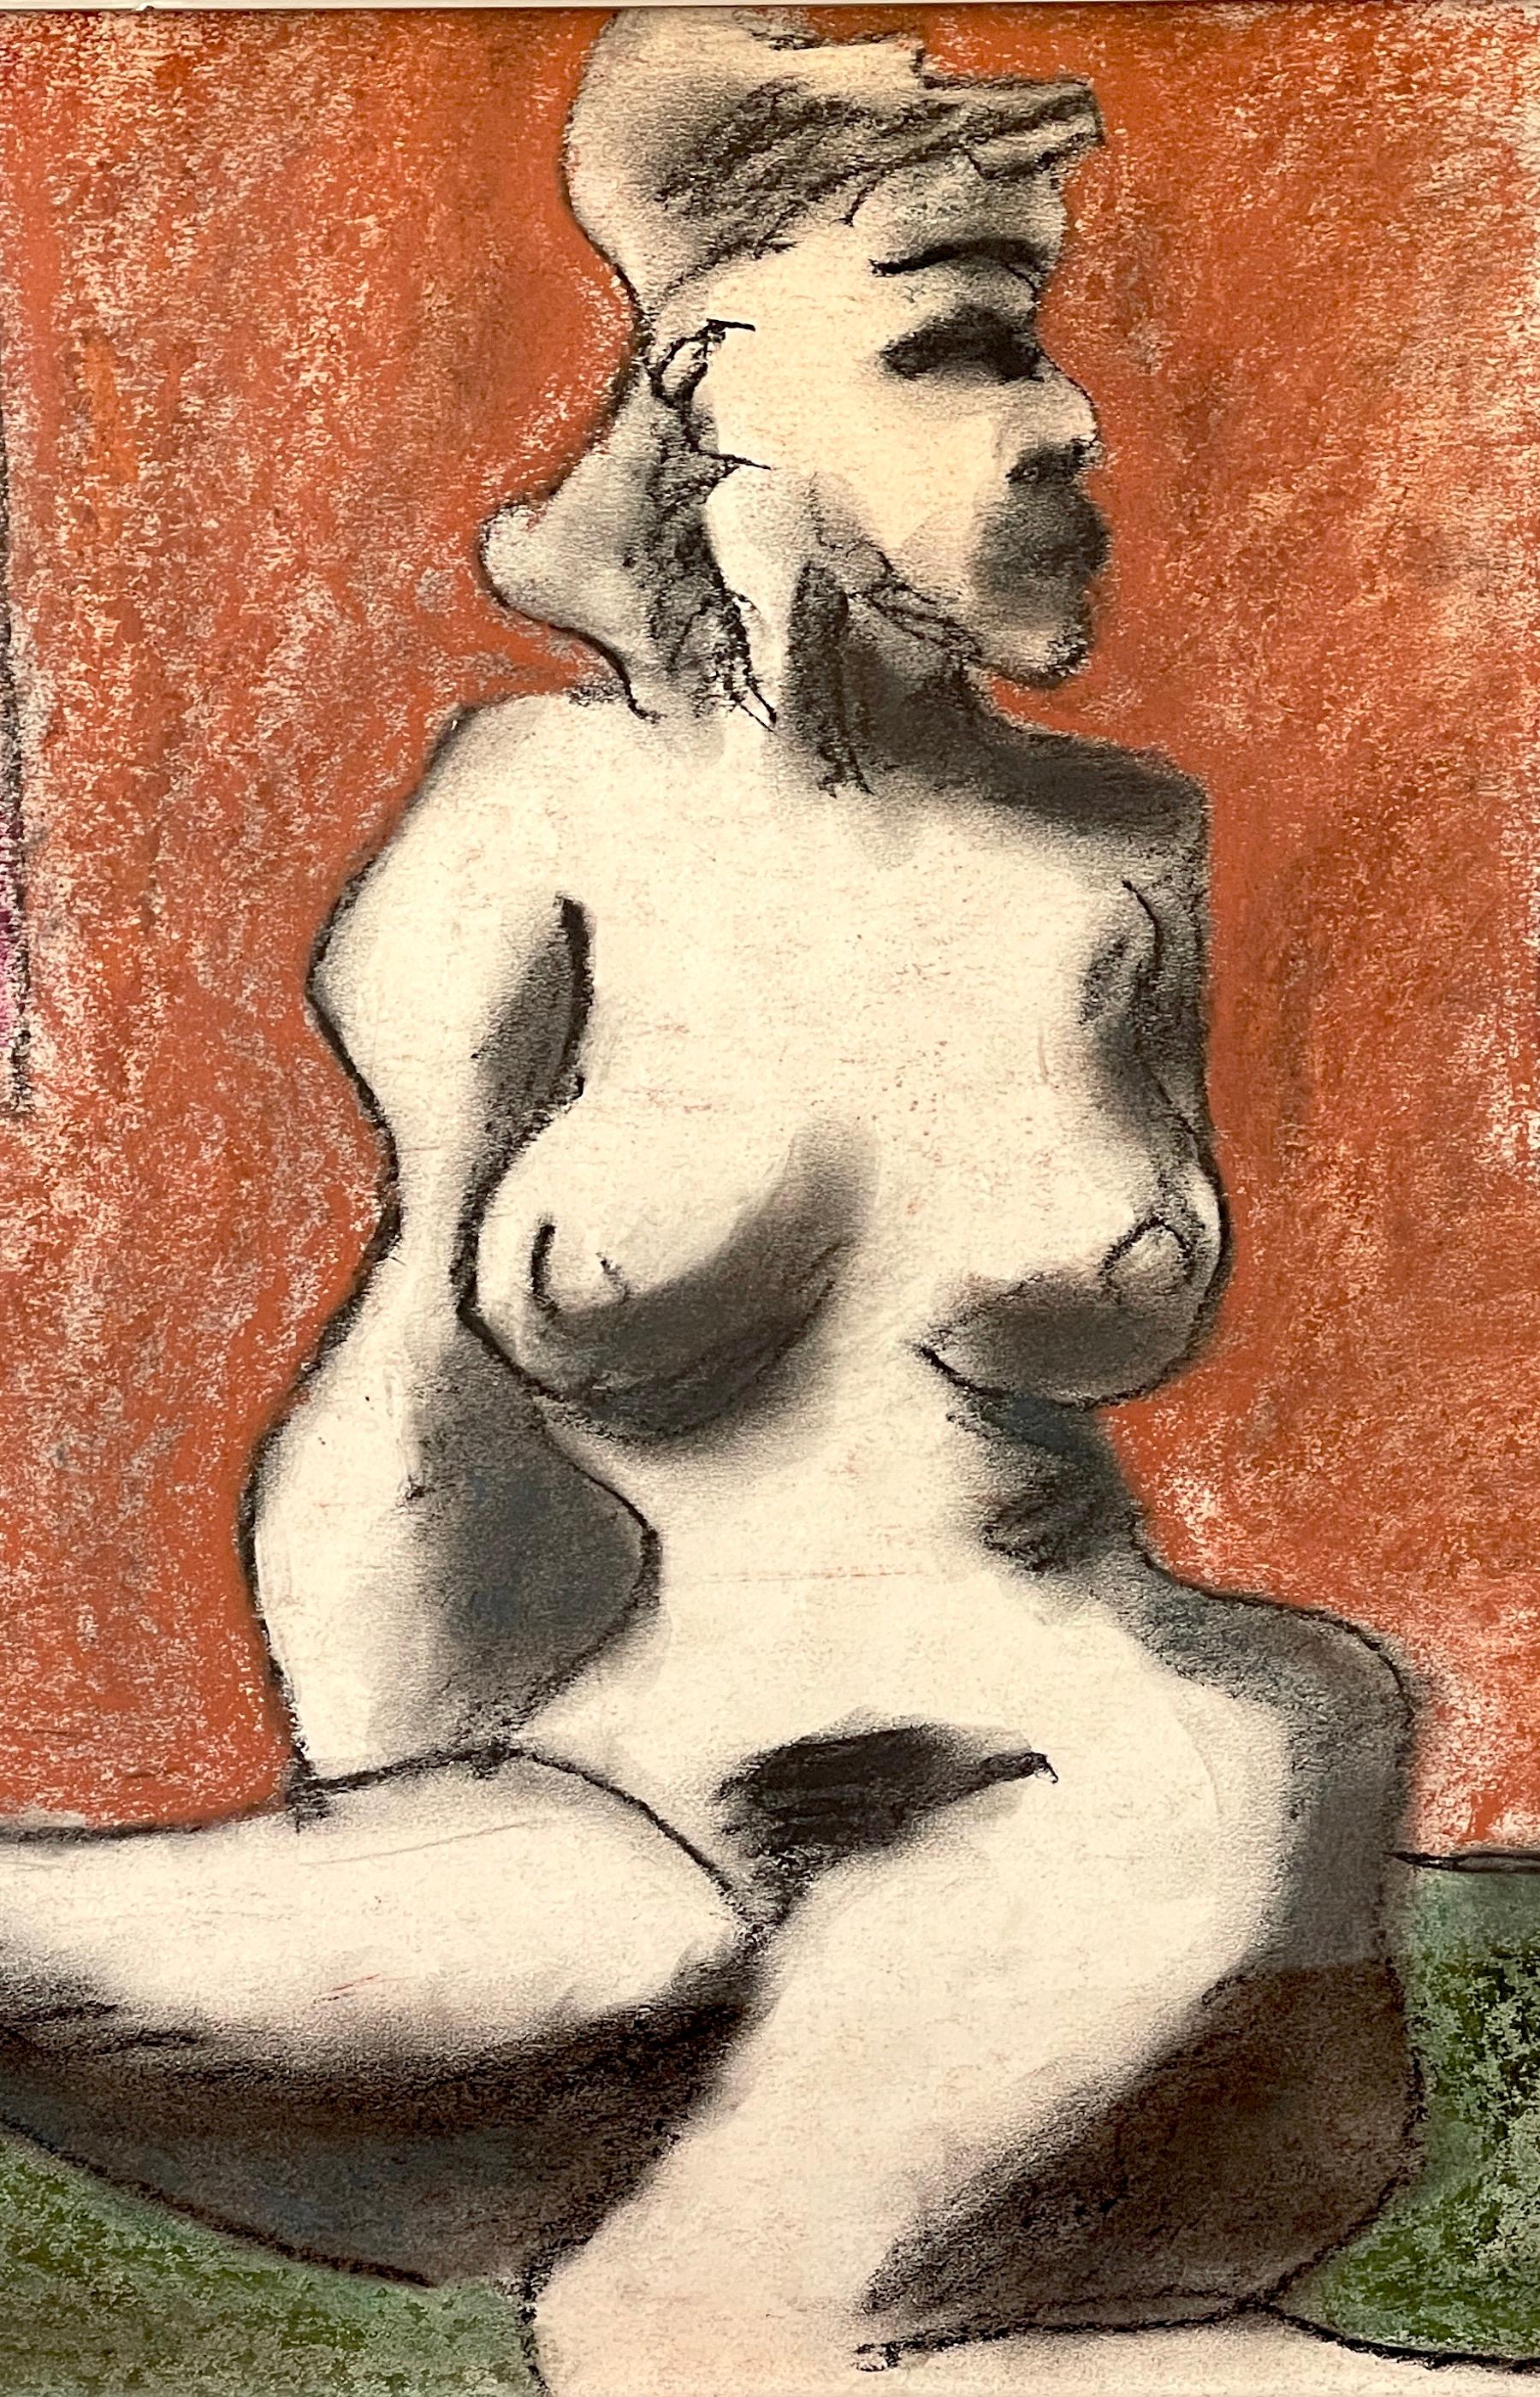 Silvered 'Seated Female Nude' Oil/Mixed Media on Paper, 1960s by Douglas D. Peden For Sale